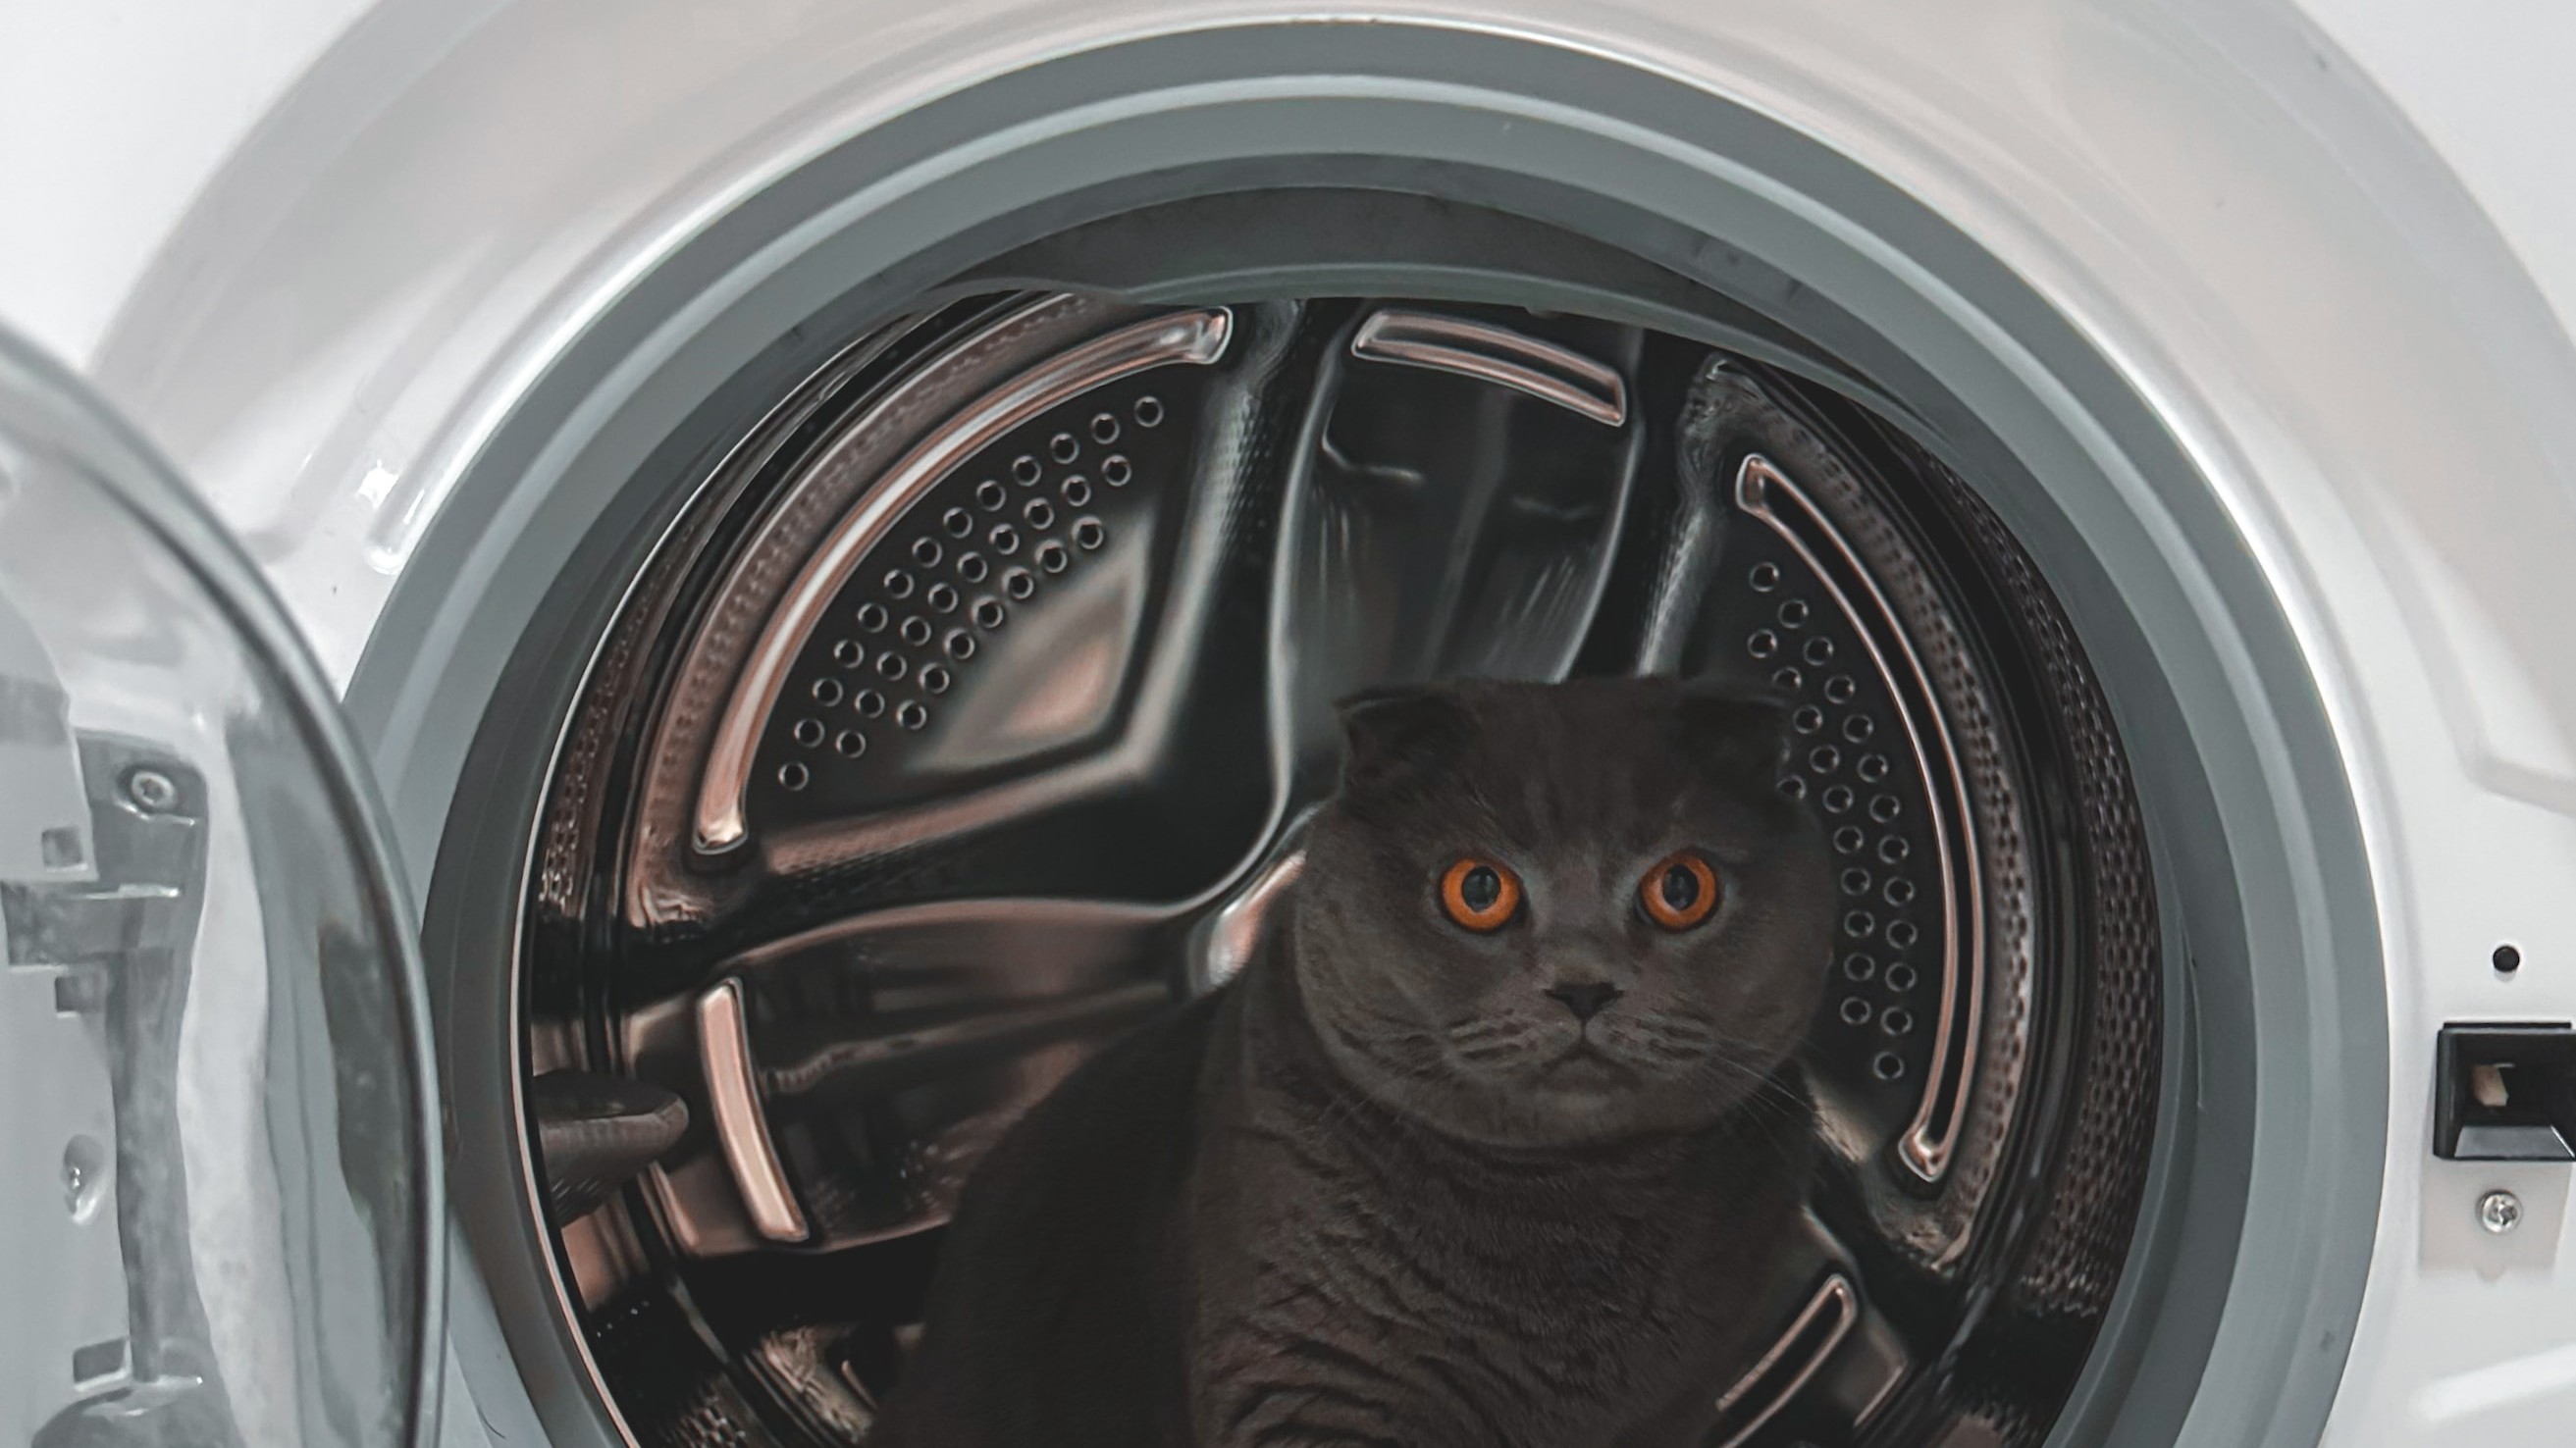 Don't Overload the Washing Machine to prevent smelly clothes